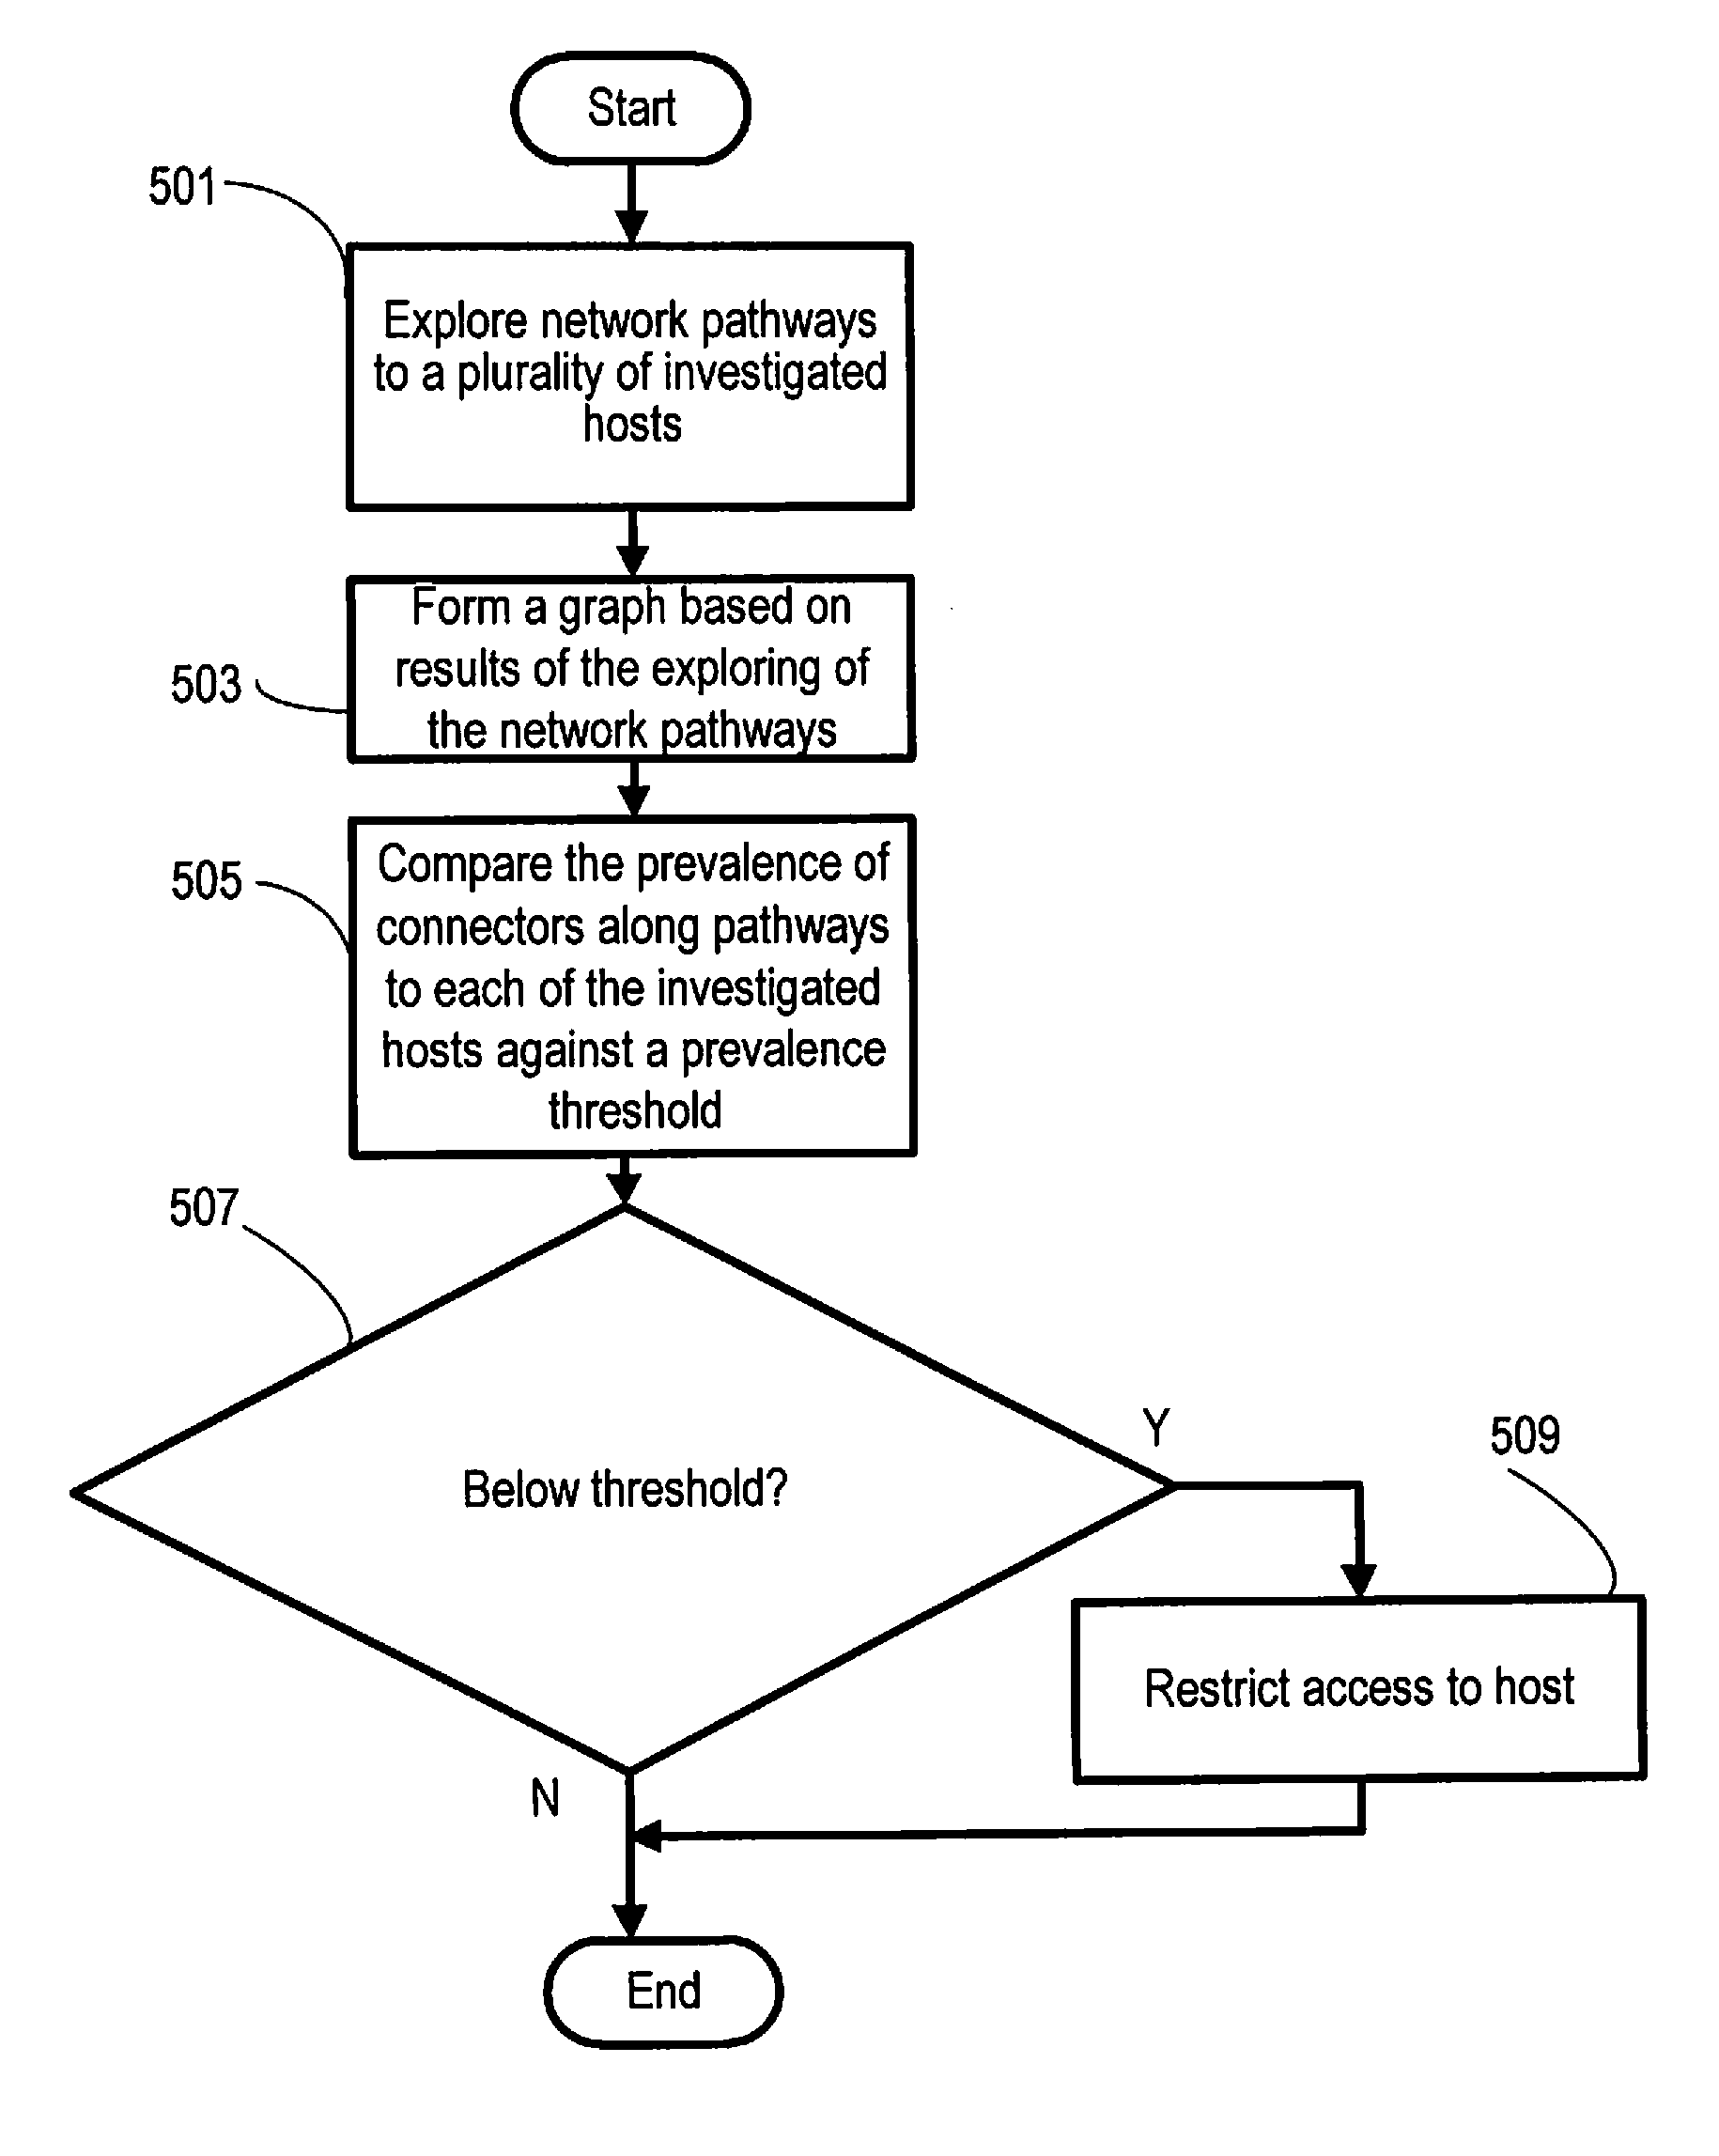 System and method for restricting pathways to harmful hosts in computer networks